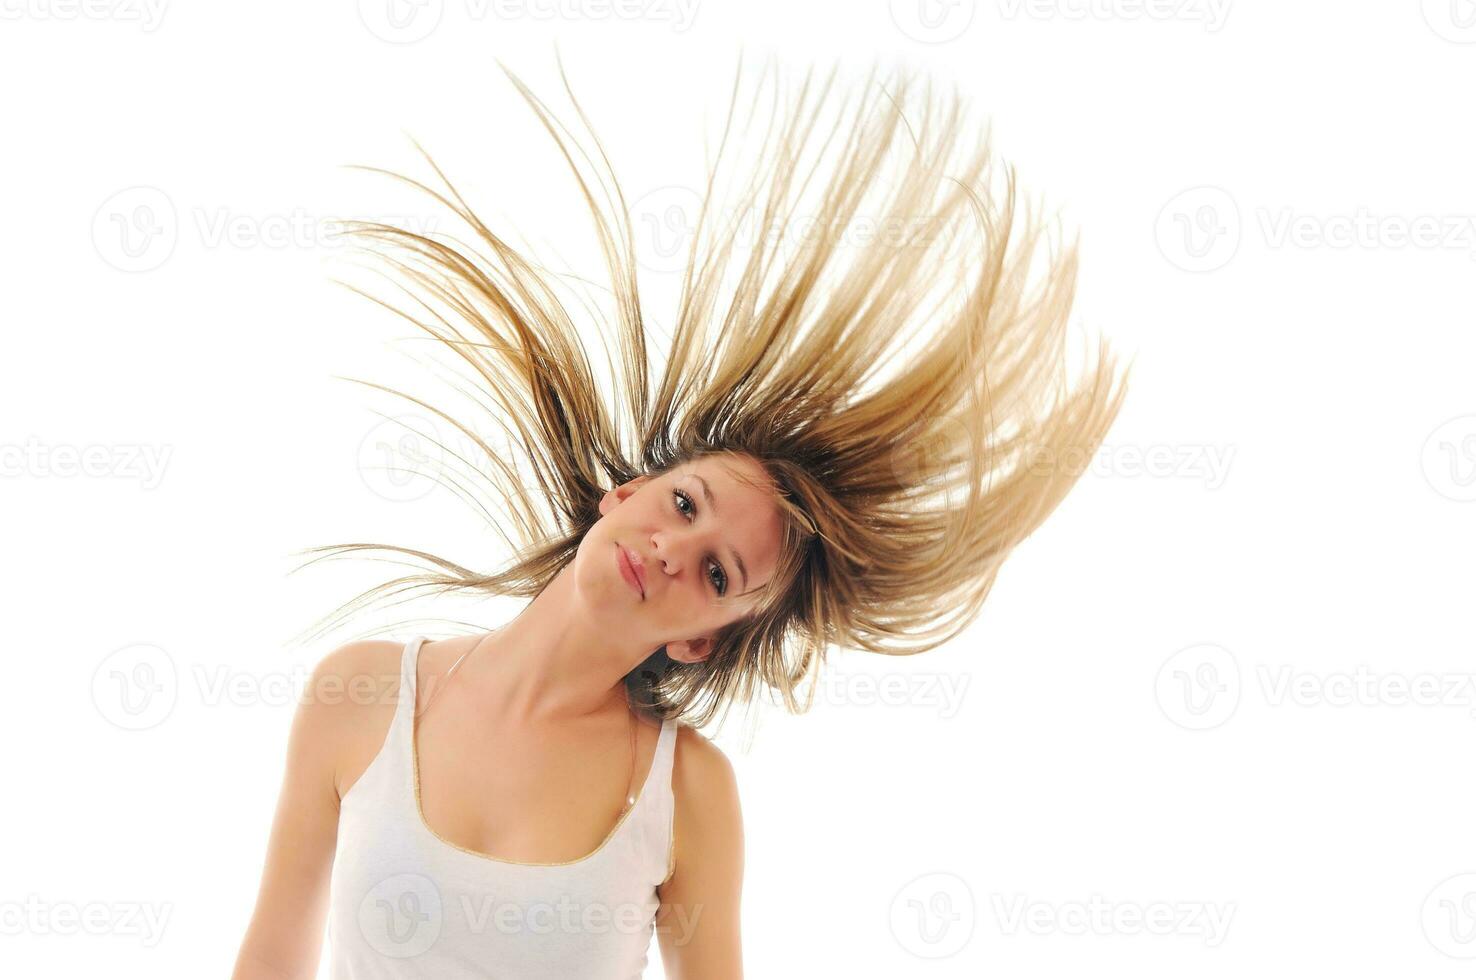 party woman isolated with wind in hair photo